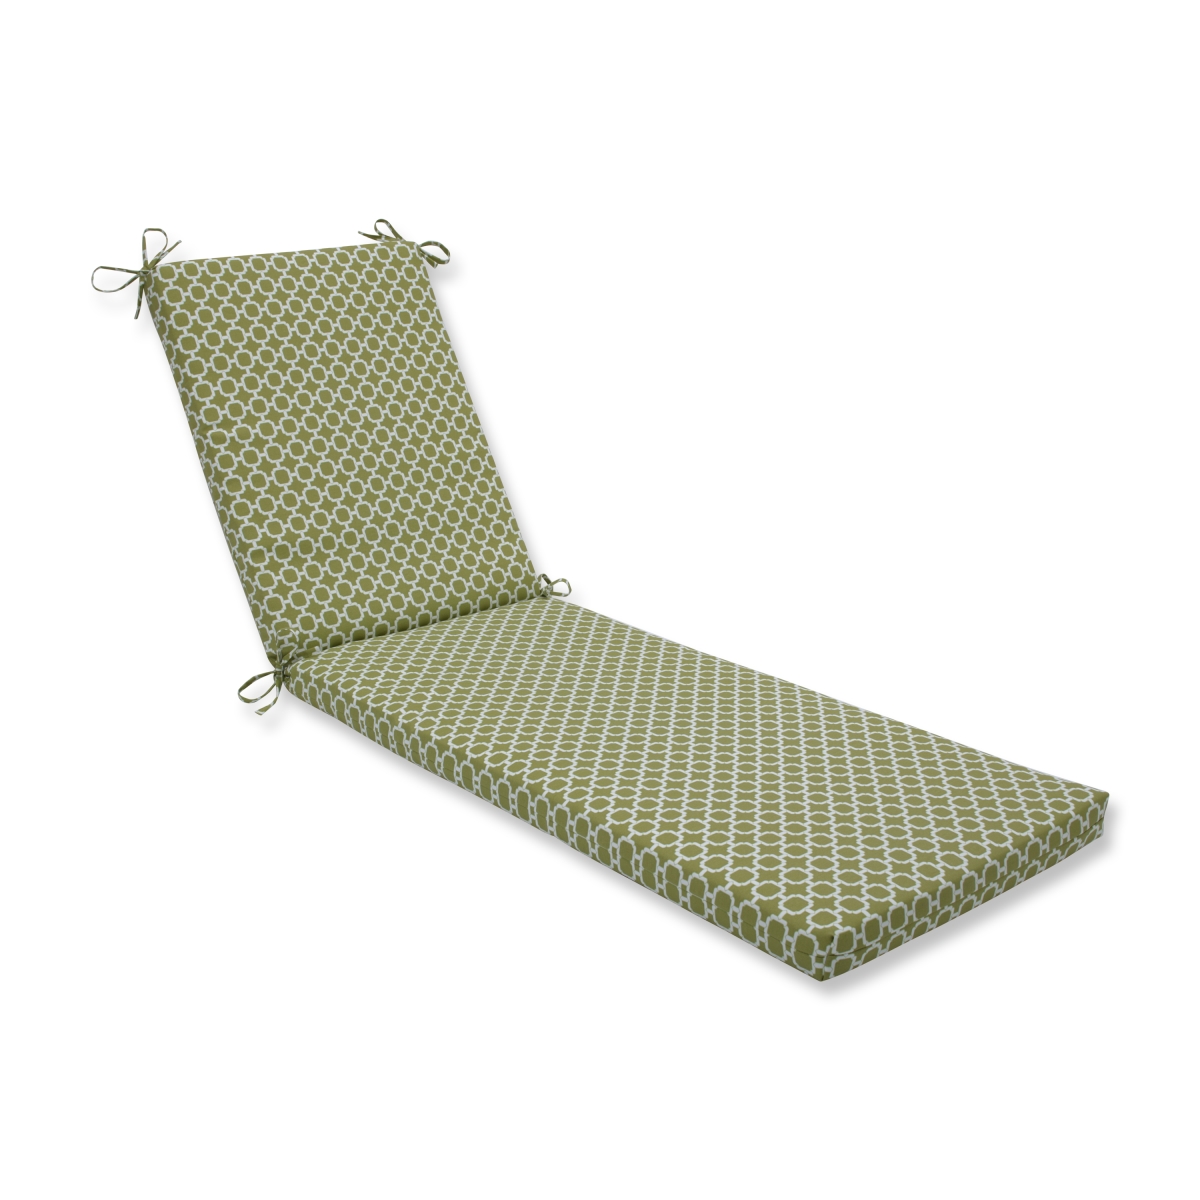 80 X 23 X 3 In. Outdoor & Indoor Hockley Pear Chaise Lounge Cushion, Green